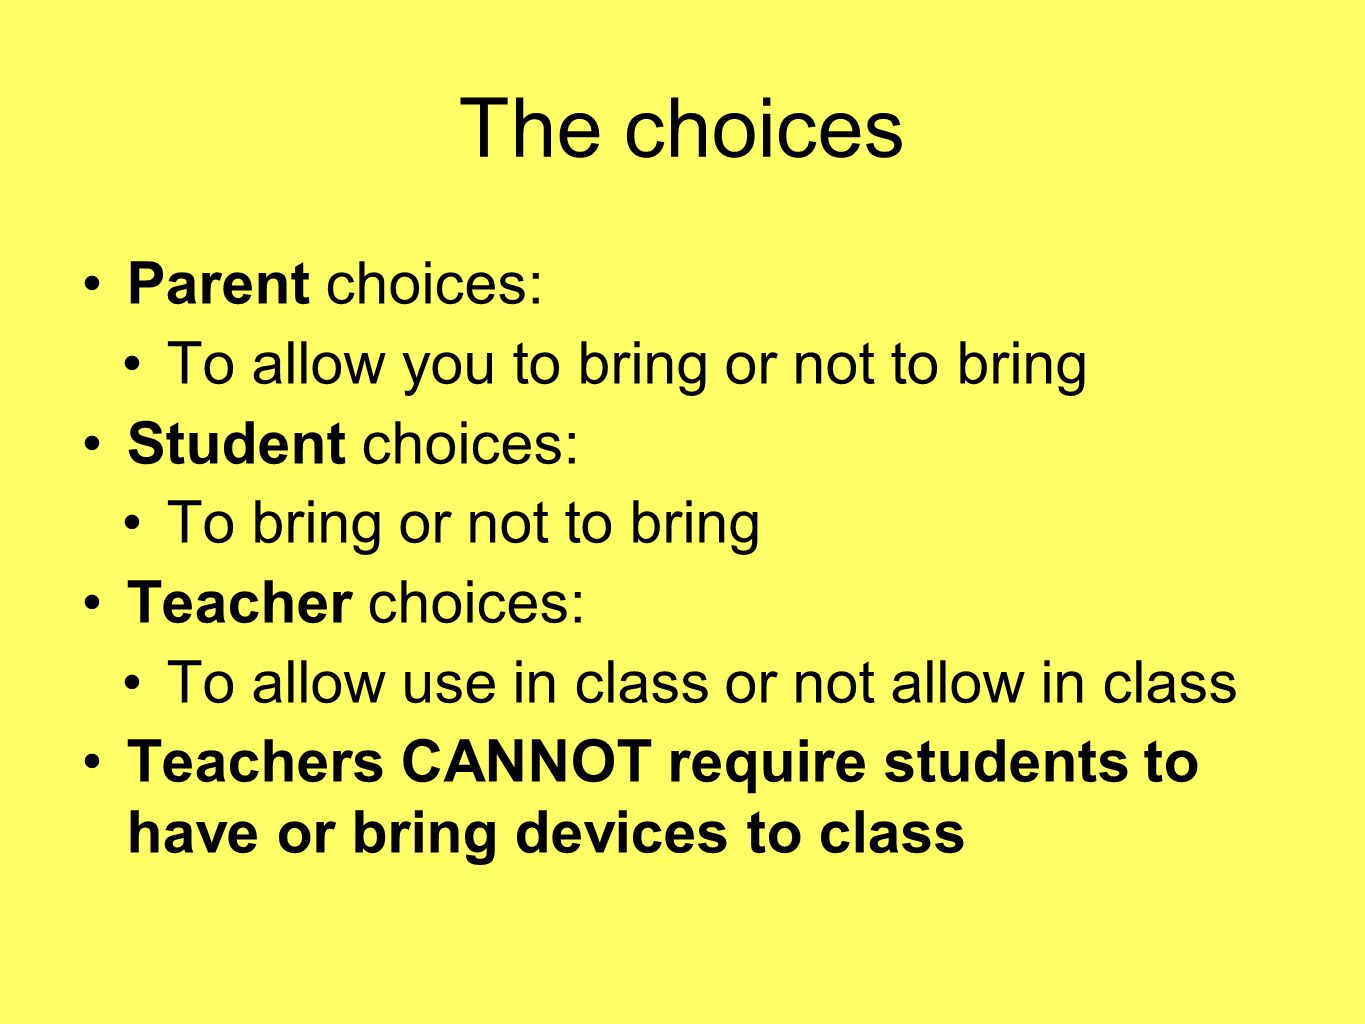 The choices Parent choices: To allow you to bring or not to bring Student choices: To bring or not to bring Teacher choices: To allow use in class or not allow in class Teachers CANNOT require students to have or bring devices to class